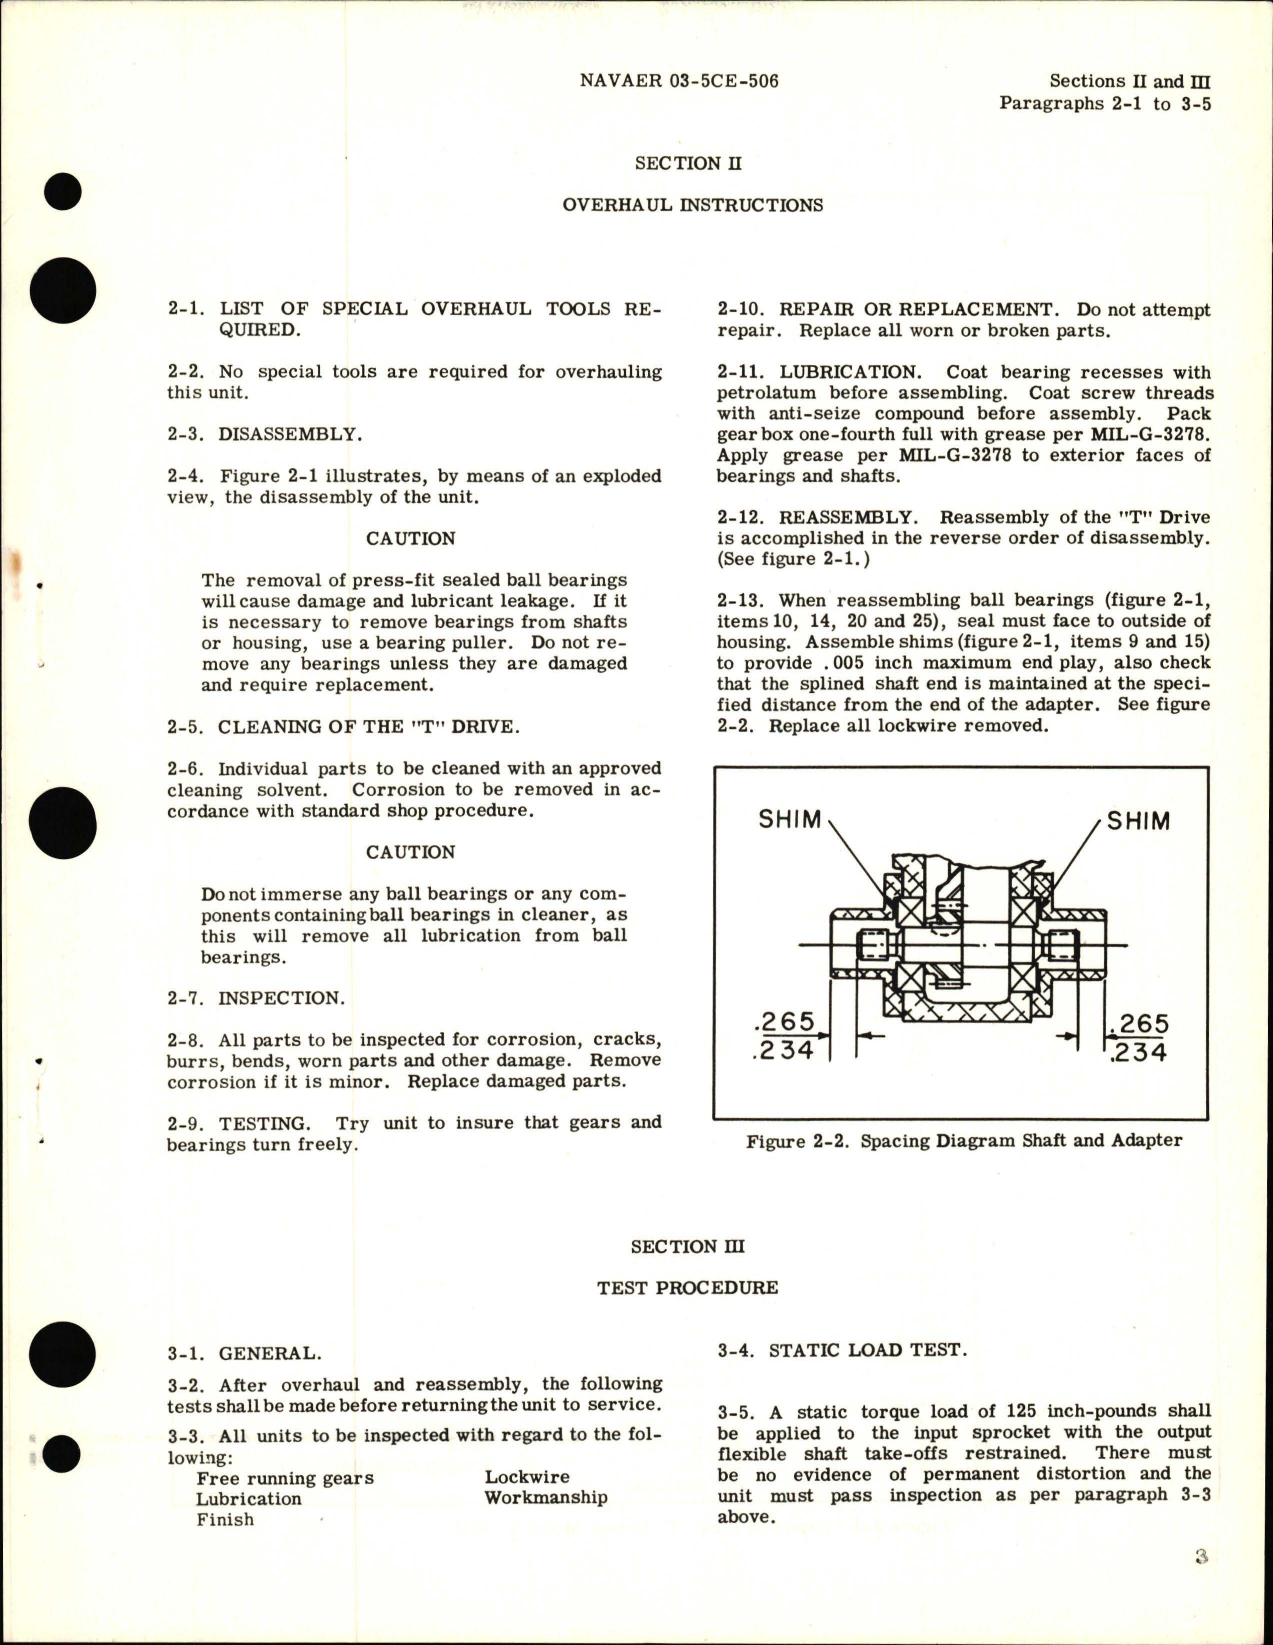 Sample page 5 from AirCorps Library document: Overhaul Instructions for T Drive - Part M-5310